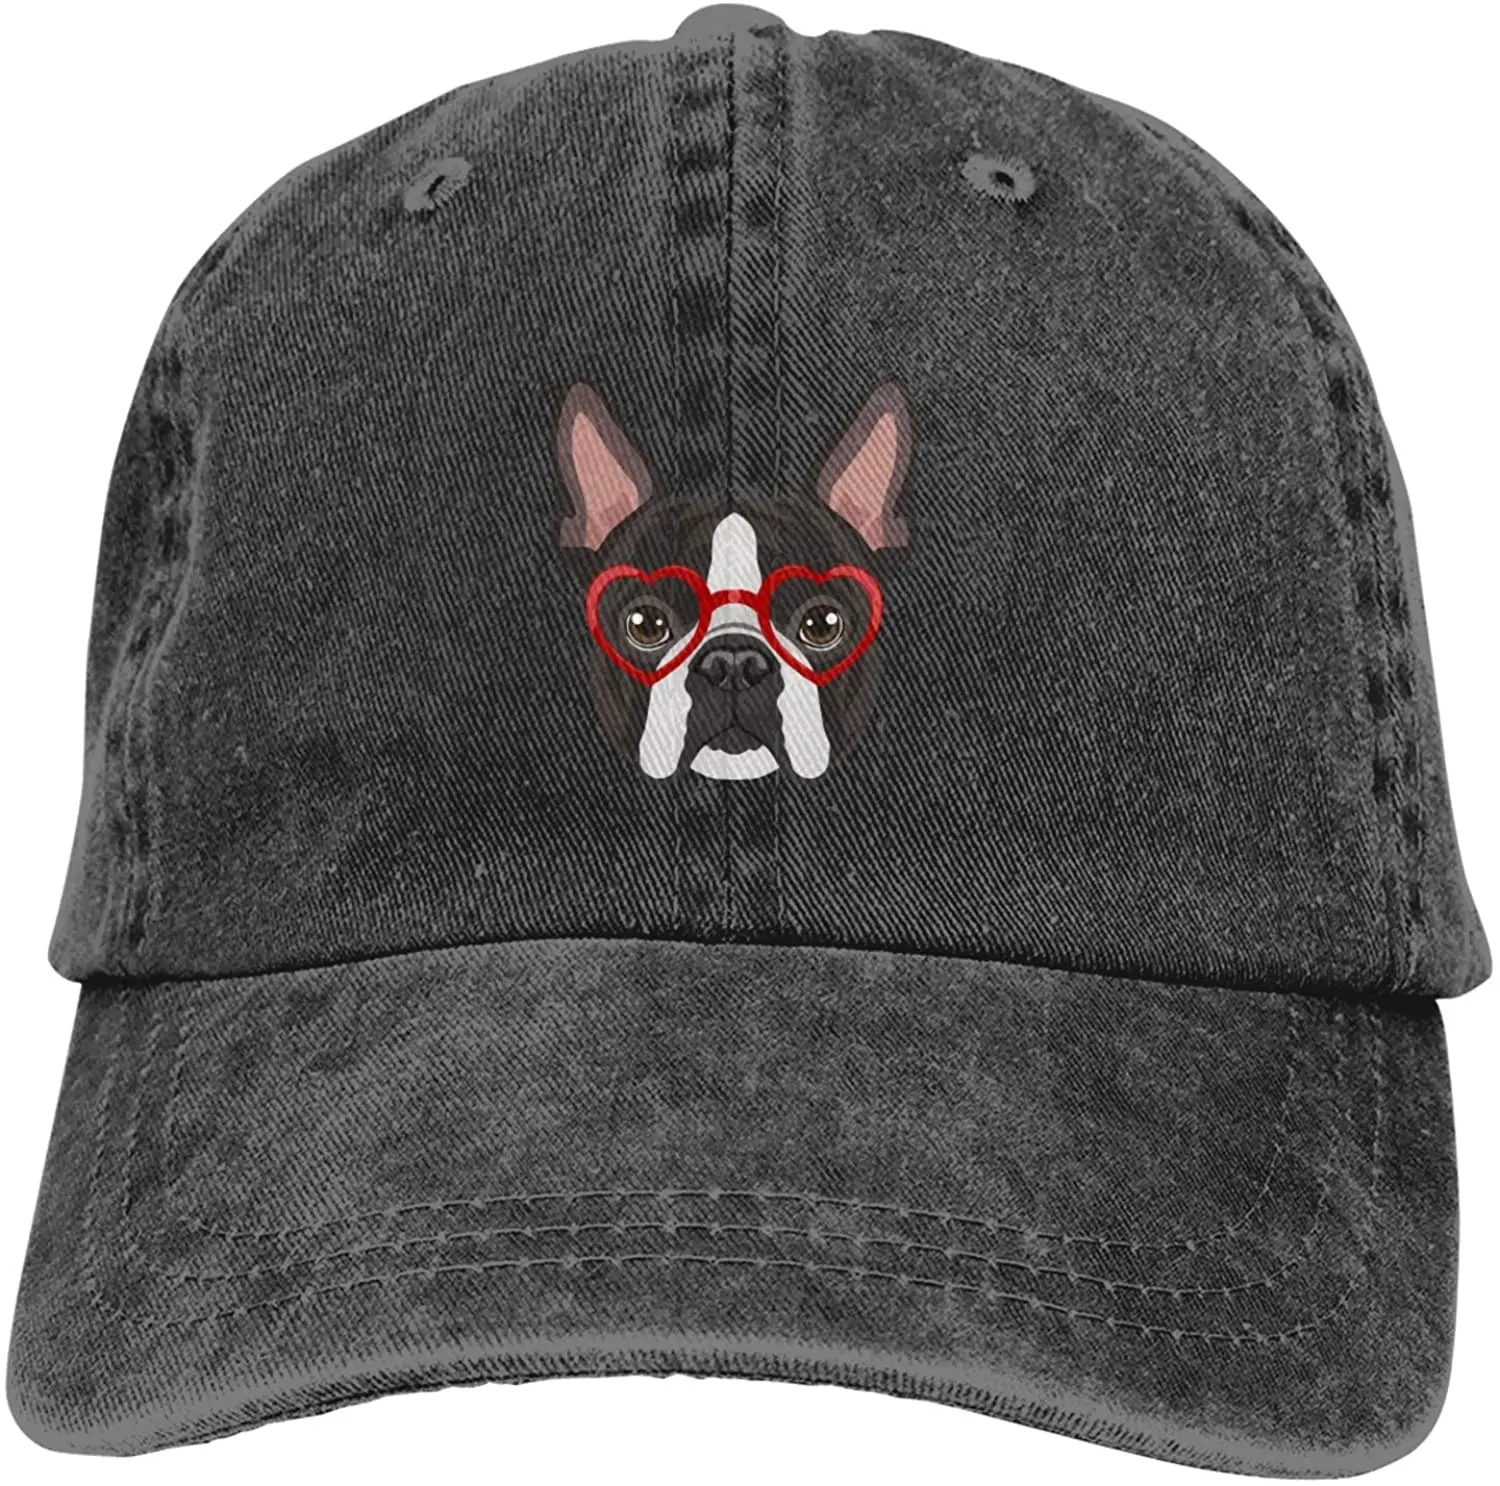 Ton terrier dog baseball dad cap classic washed 100 cotton adjustable casual sports for thumb200